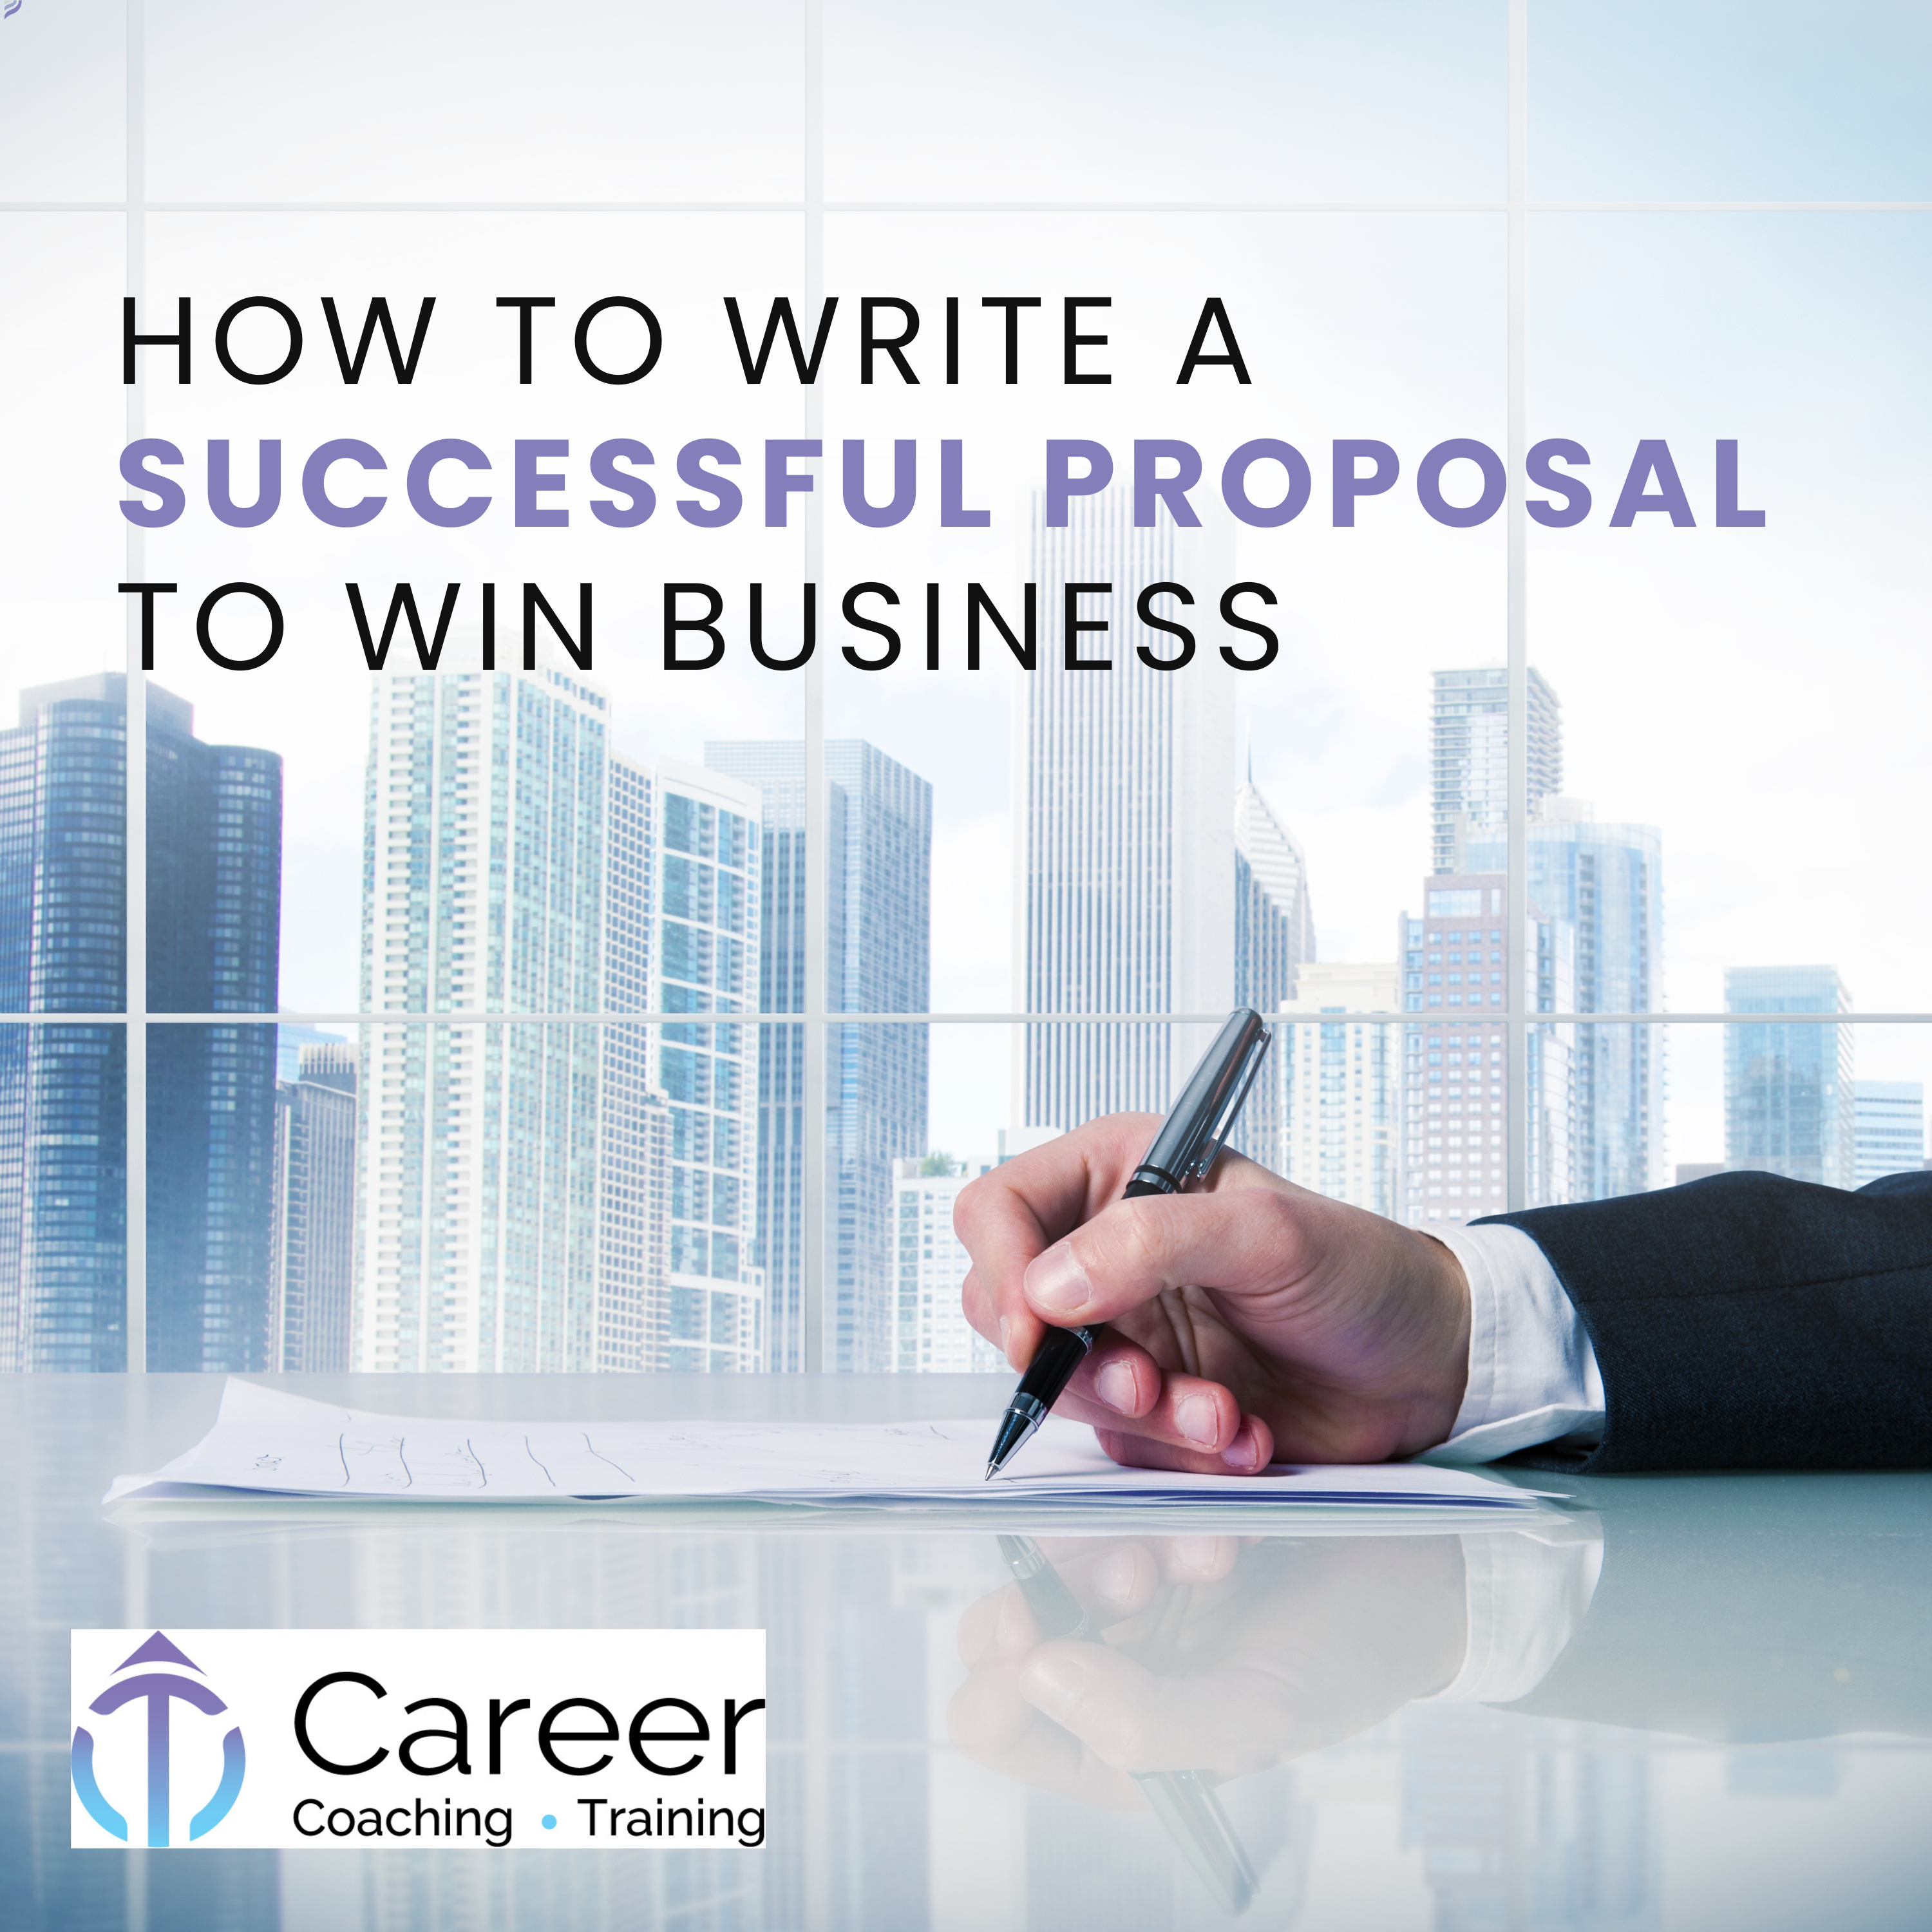 HOW TO WRITE A SUCCESSFUL PROPOSAL TO WIN BUSINESS